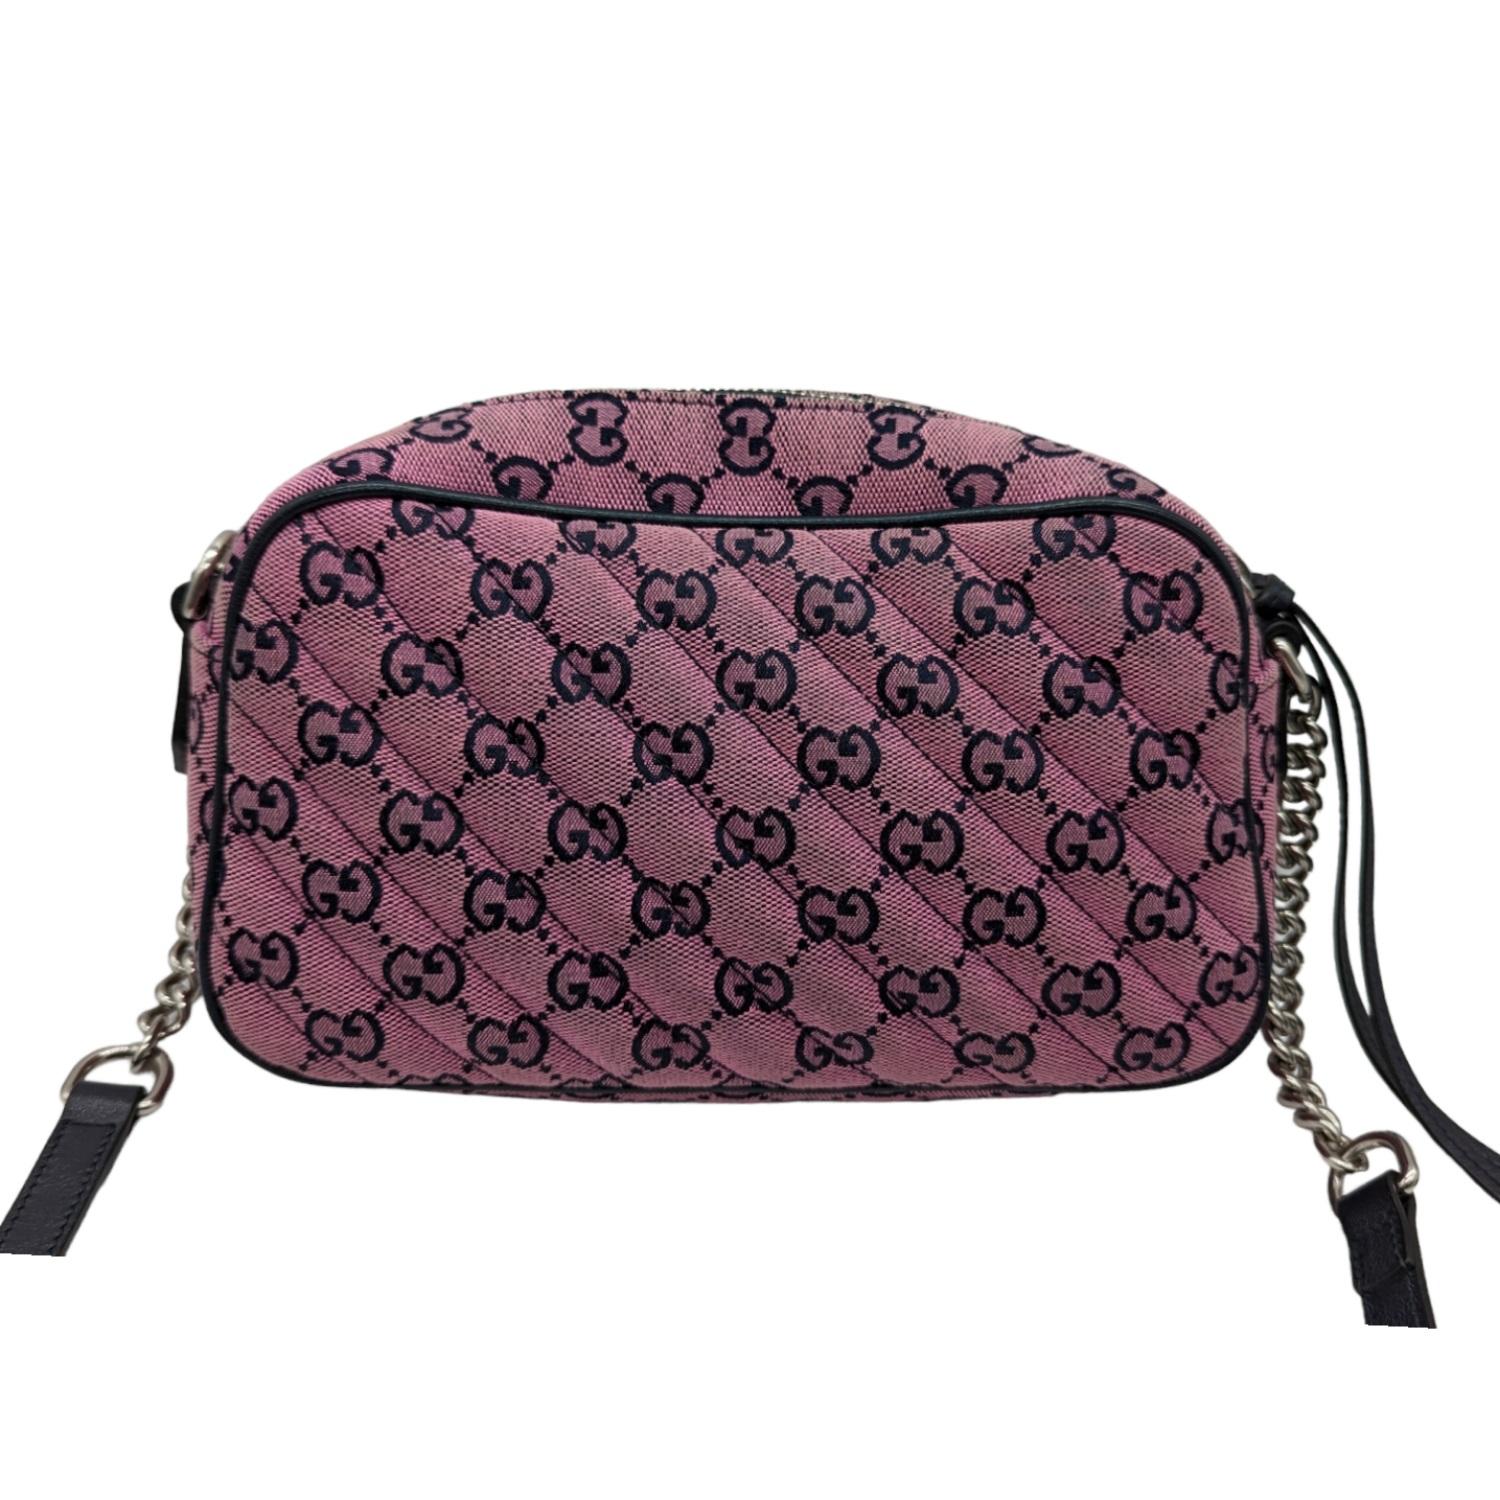 GUCCI Monogram Matelasse Diagonal Small GG Marmont Chain Shoulder Bag in Pink and Blue. This stylish shoulder bag is crafted of pink Gucci monogram with blue leather trim and features a blue leather and silver chain link adjustable shoulder strap